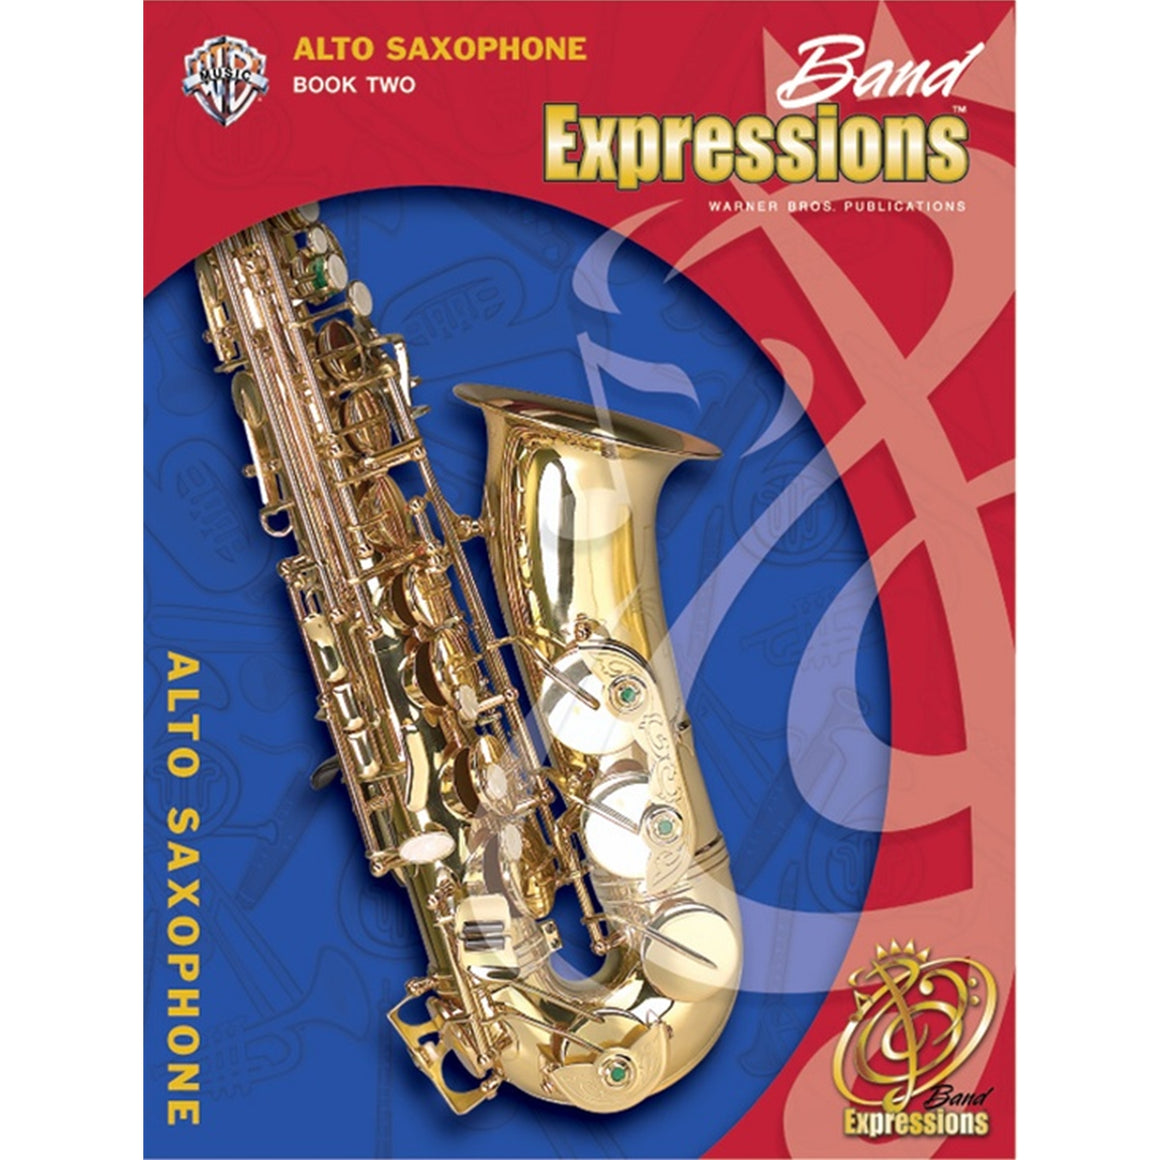 ALFRED 00EMCB2008CD Band Expressions , Book Two: Student Edition [Alto Saxophone]